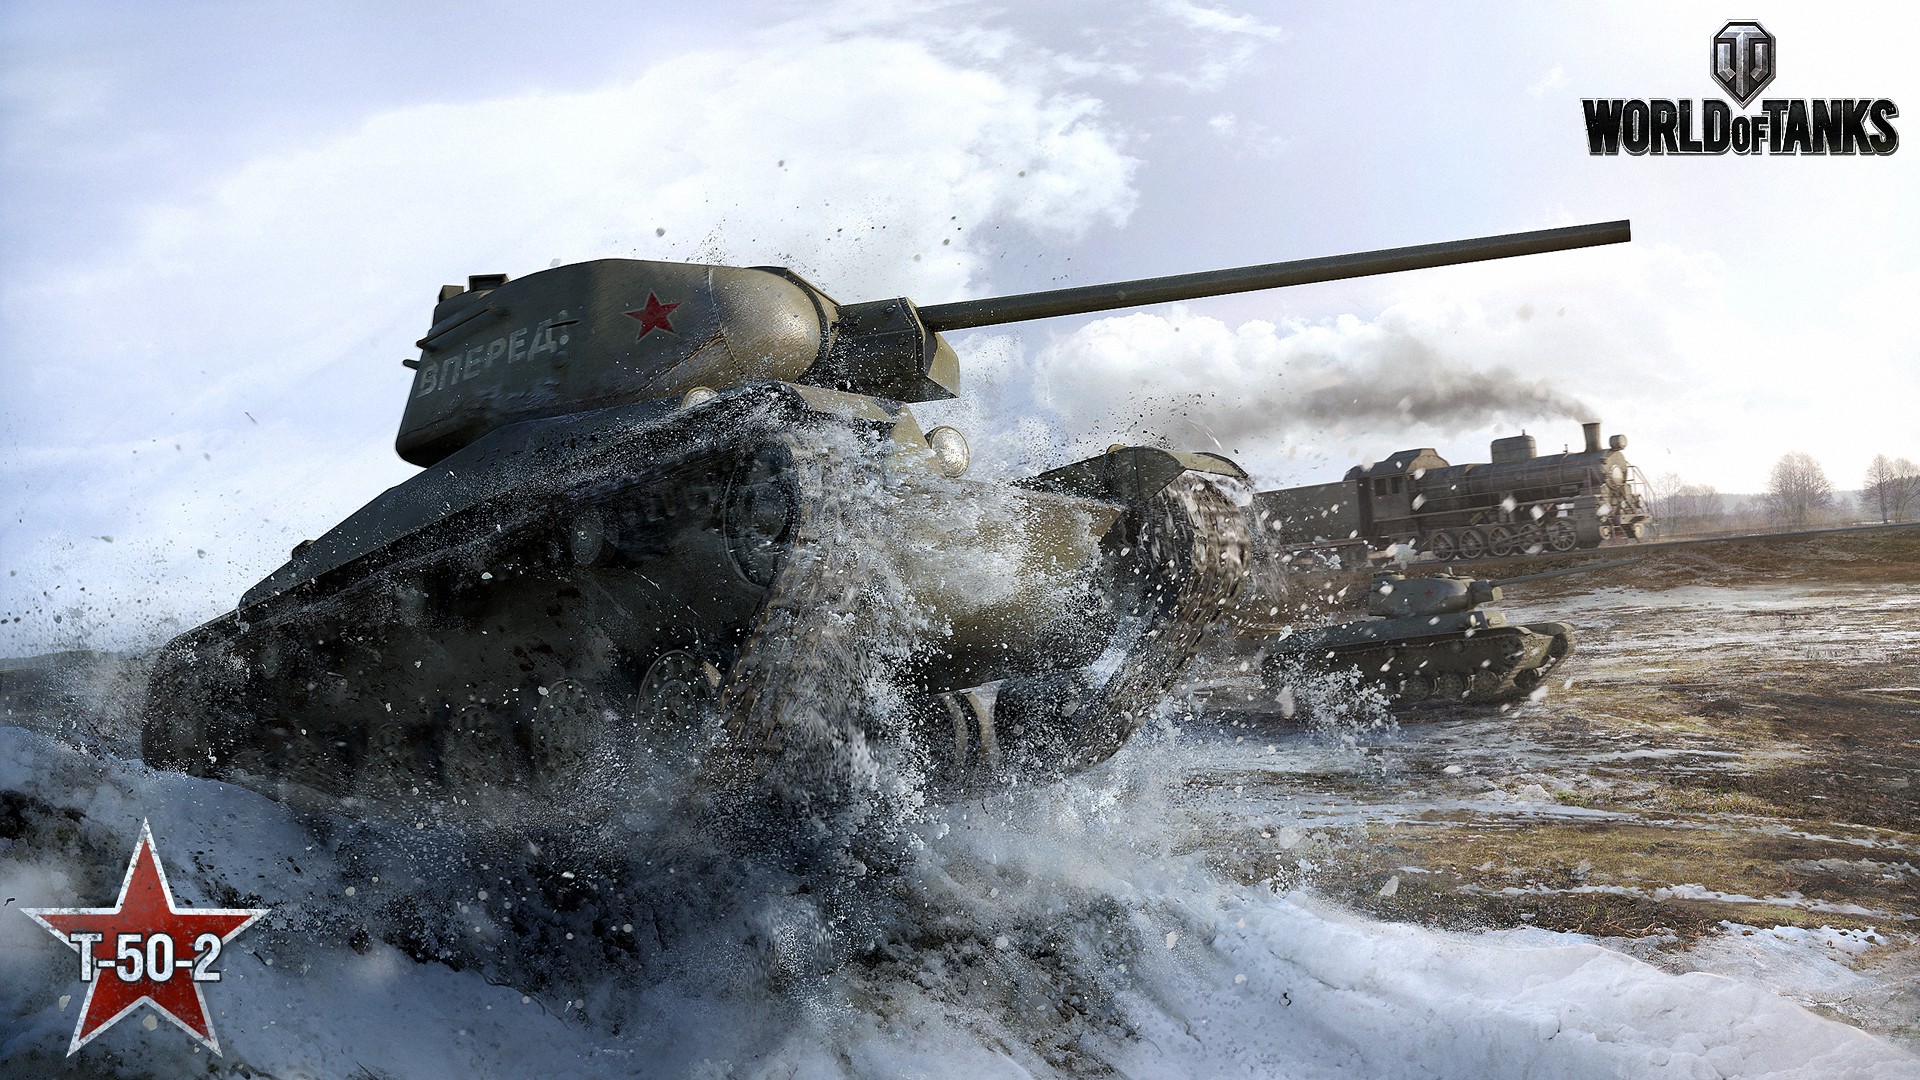 General 1920x1080 World of Tanks PC gaming video games video game art tank military vehicle military vehicle